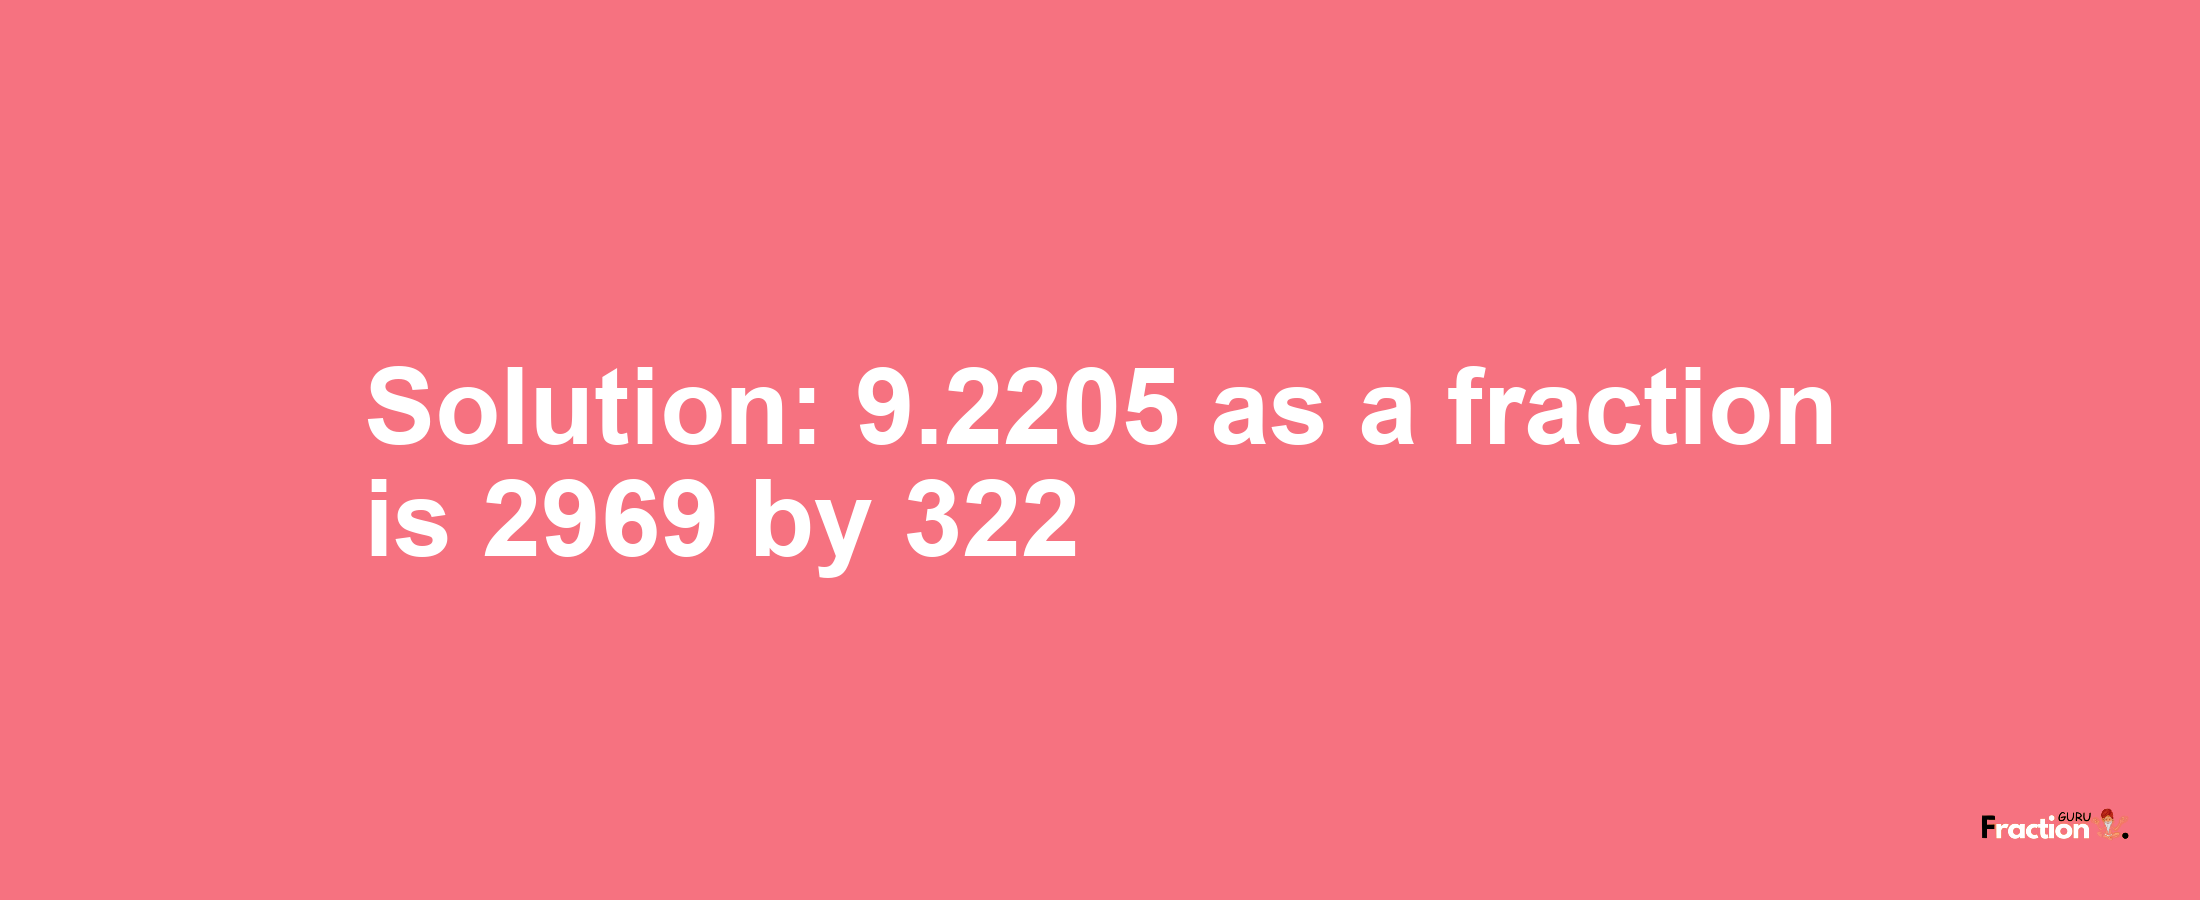 Solution:9.2205 as a fraction is 2969/322